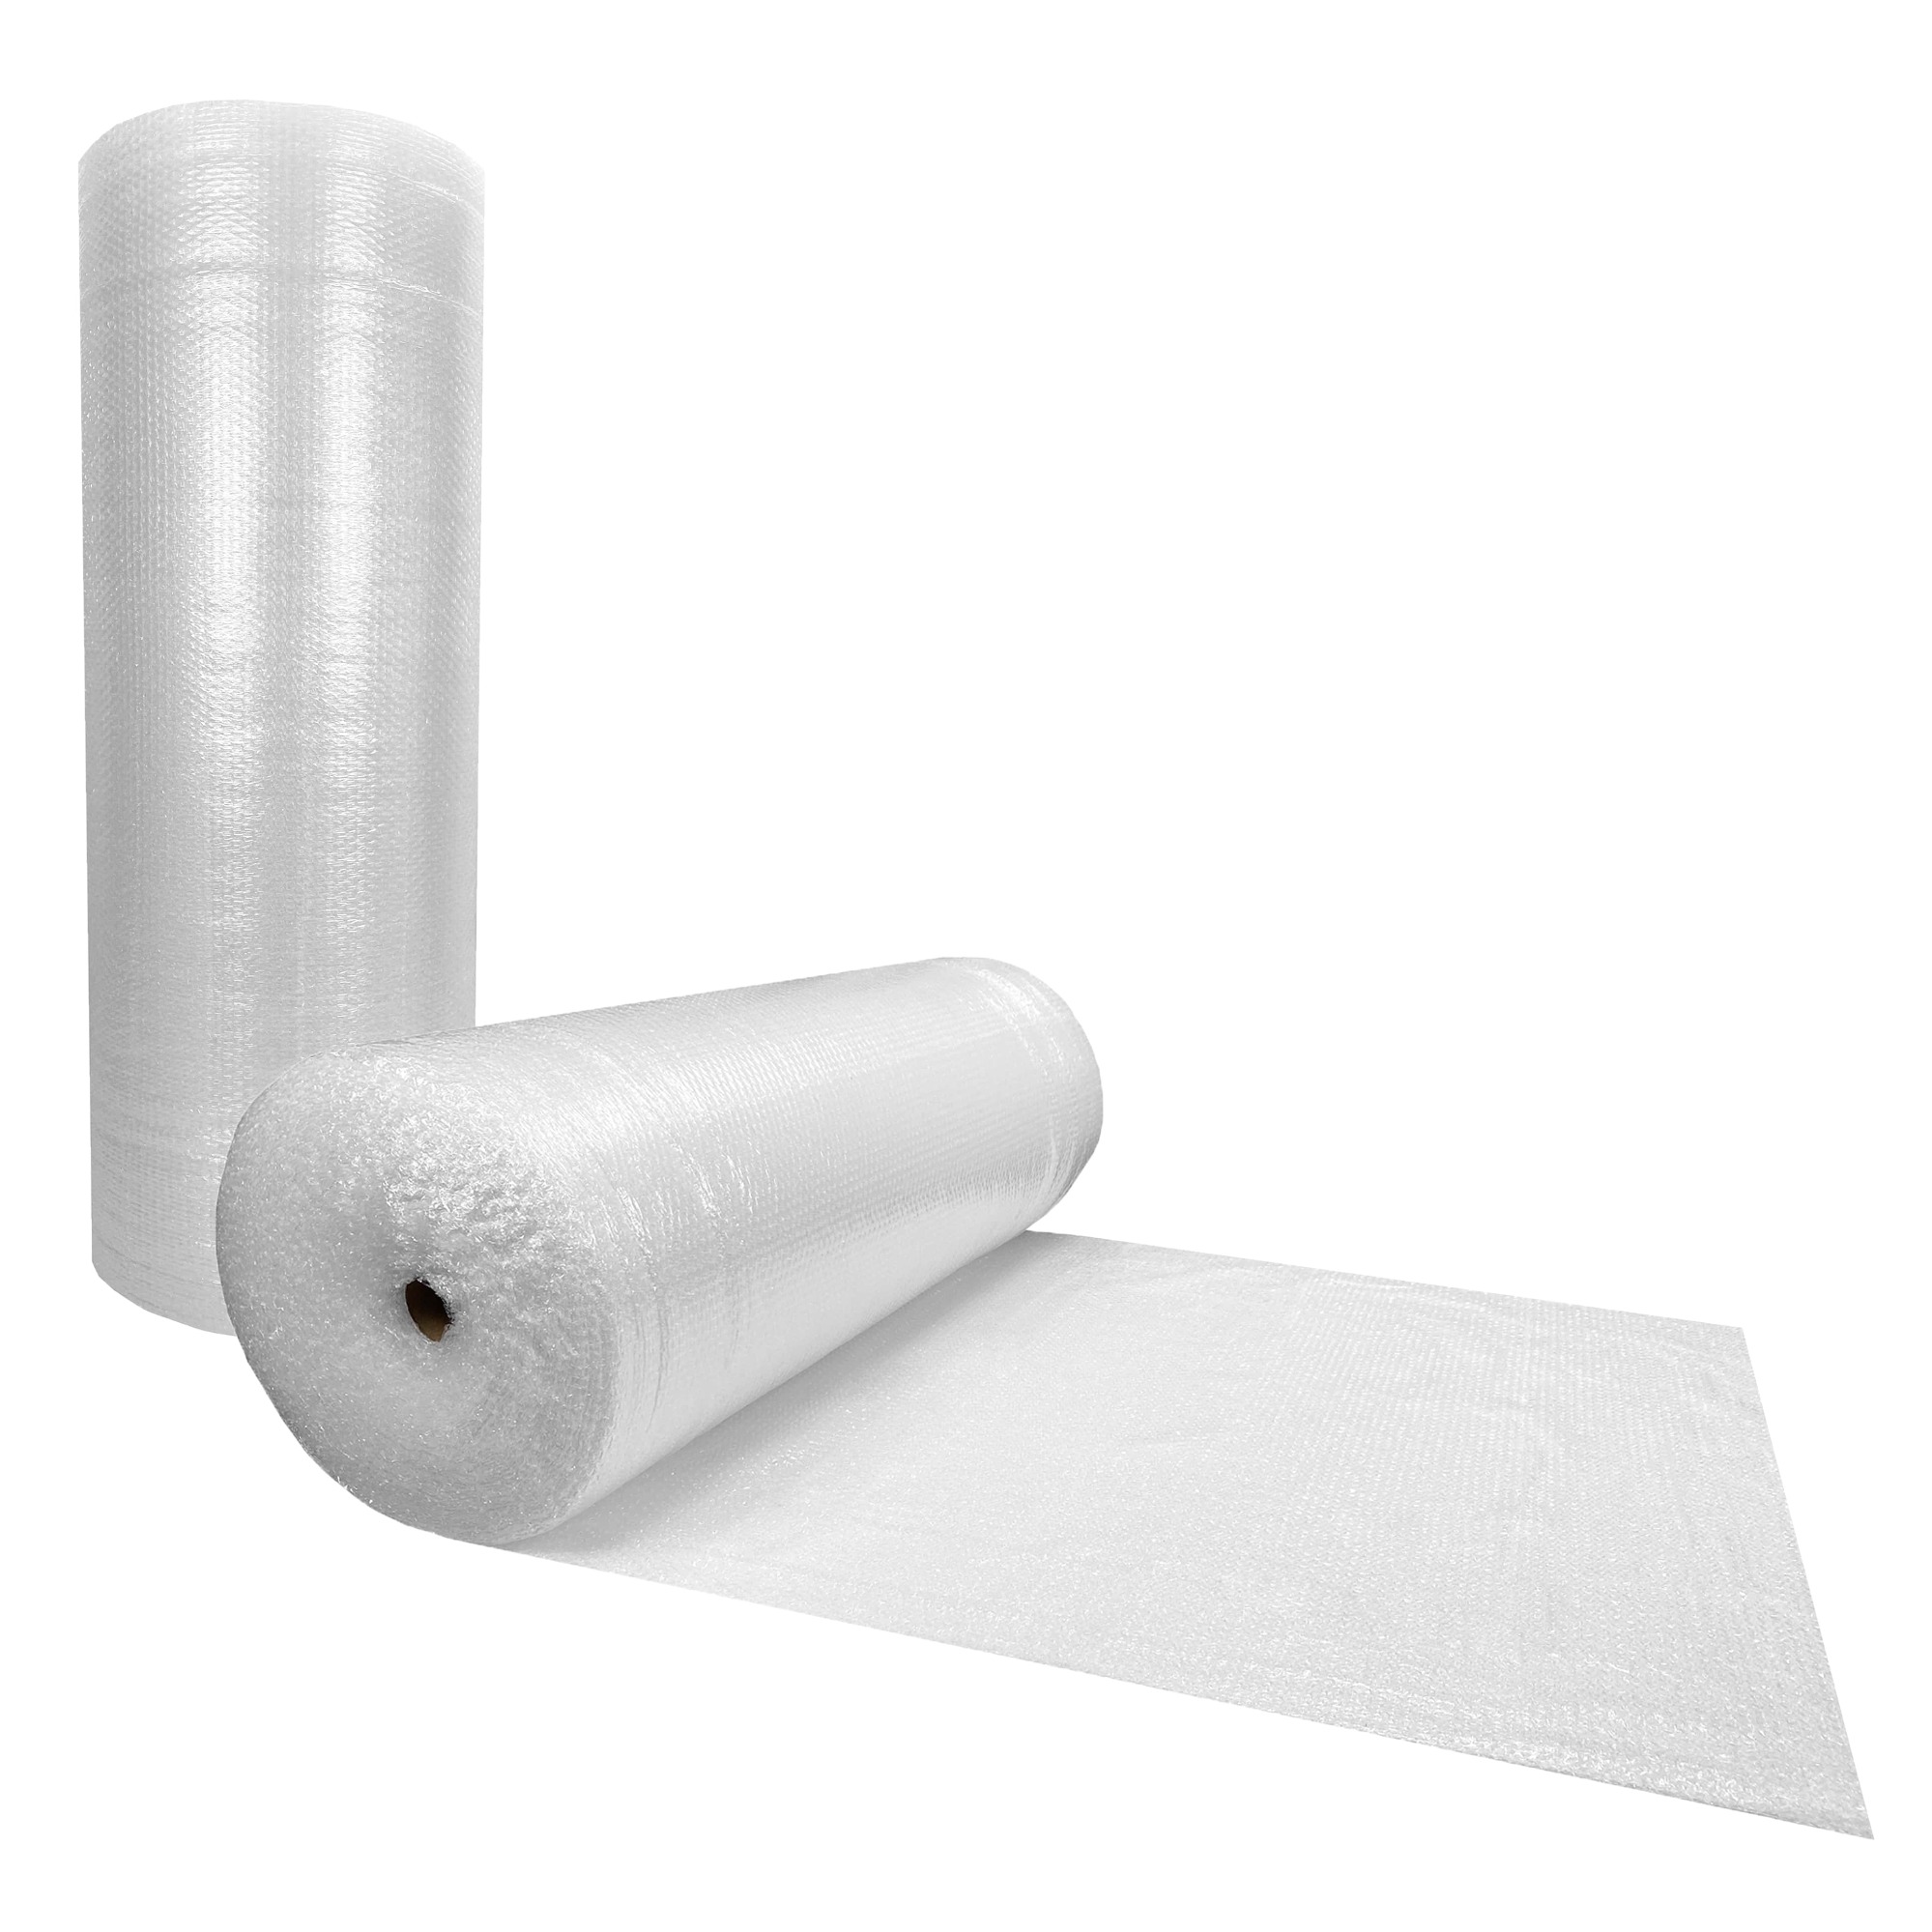 ROLLS of Small & Large BUBBLE WRAP & Cases of PACKING TAPE